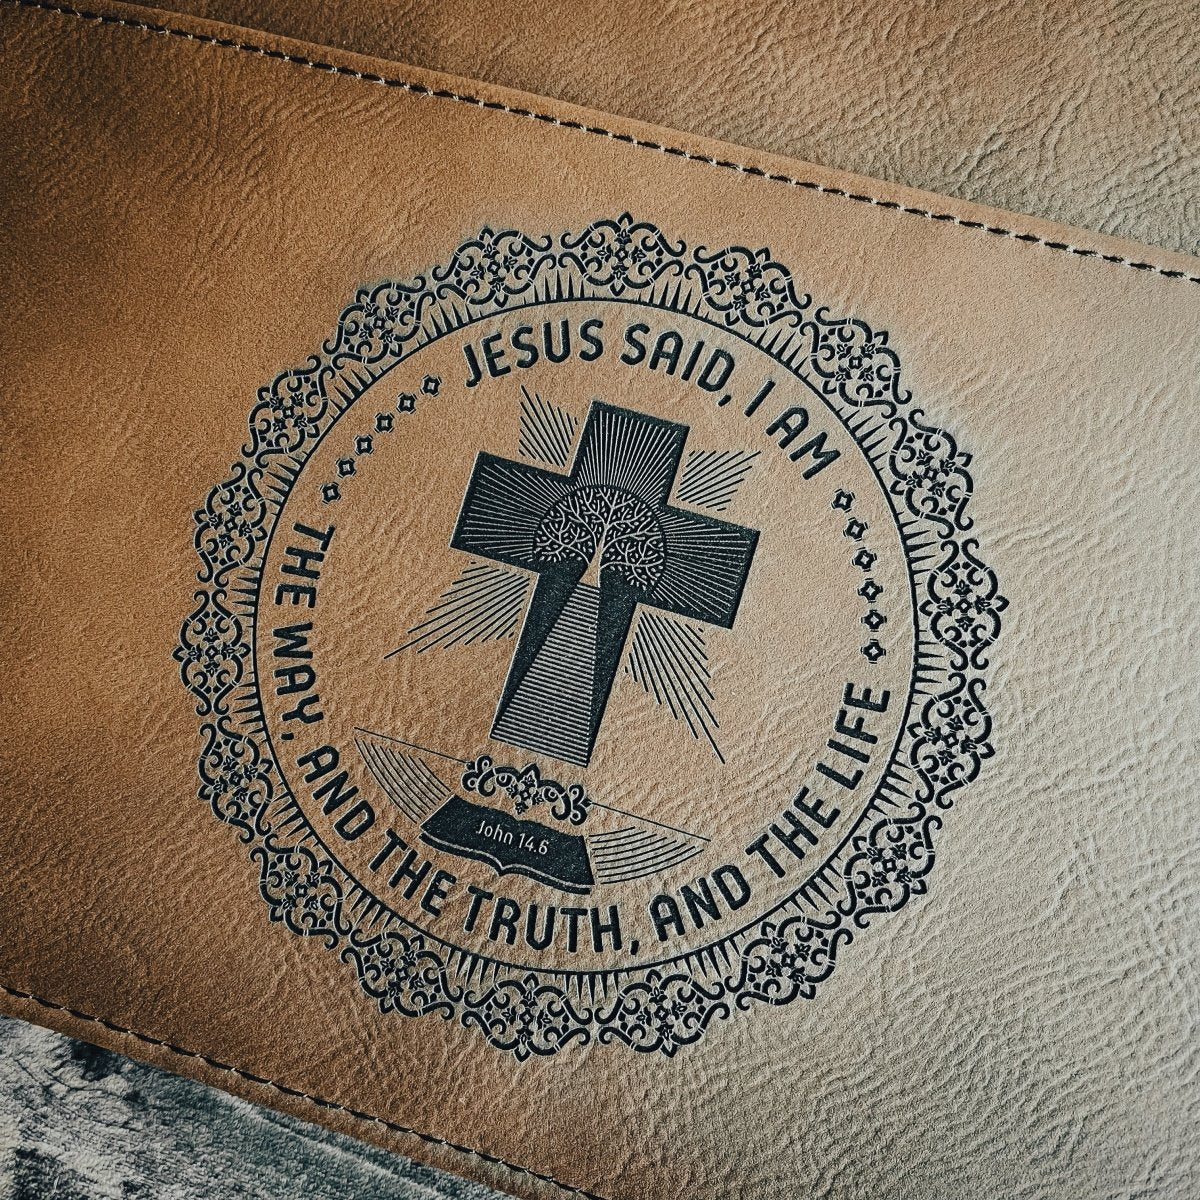 Bible Cover - I AM: The Way, and The Truth, and The Life - Bible Cover - The Reformed Sage - #reformed# - #reformed_gifts# - #christian_gifts#